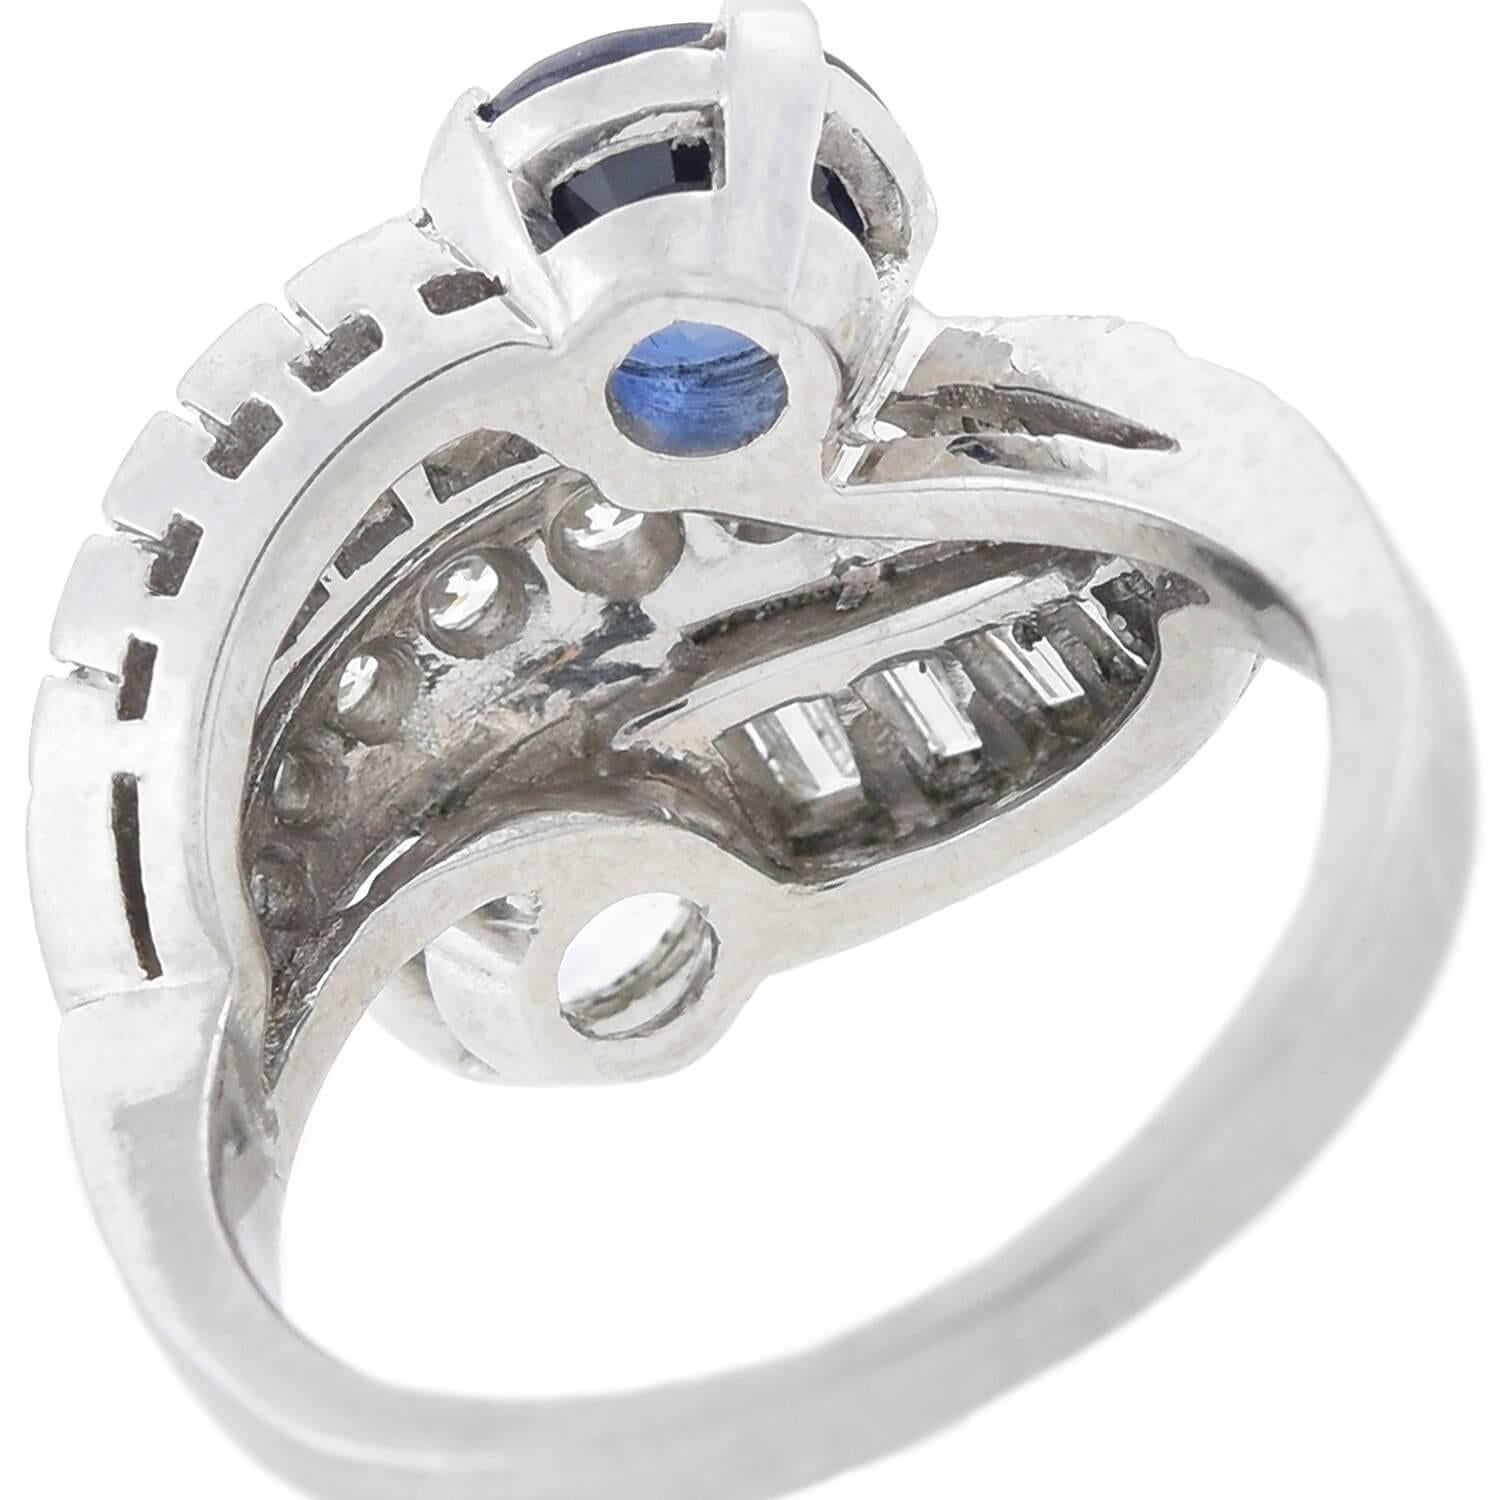 C.D. Peacock Art Deco Platinum Diamond and Sapphire Ring In Good Condition For Sale In Narberth, PA